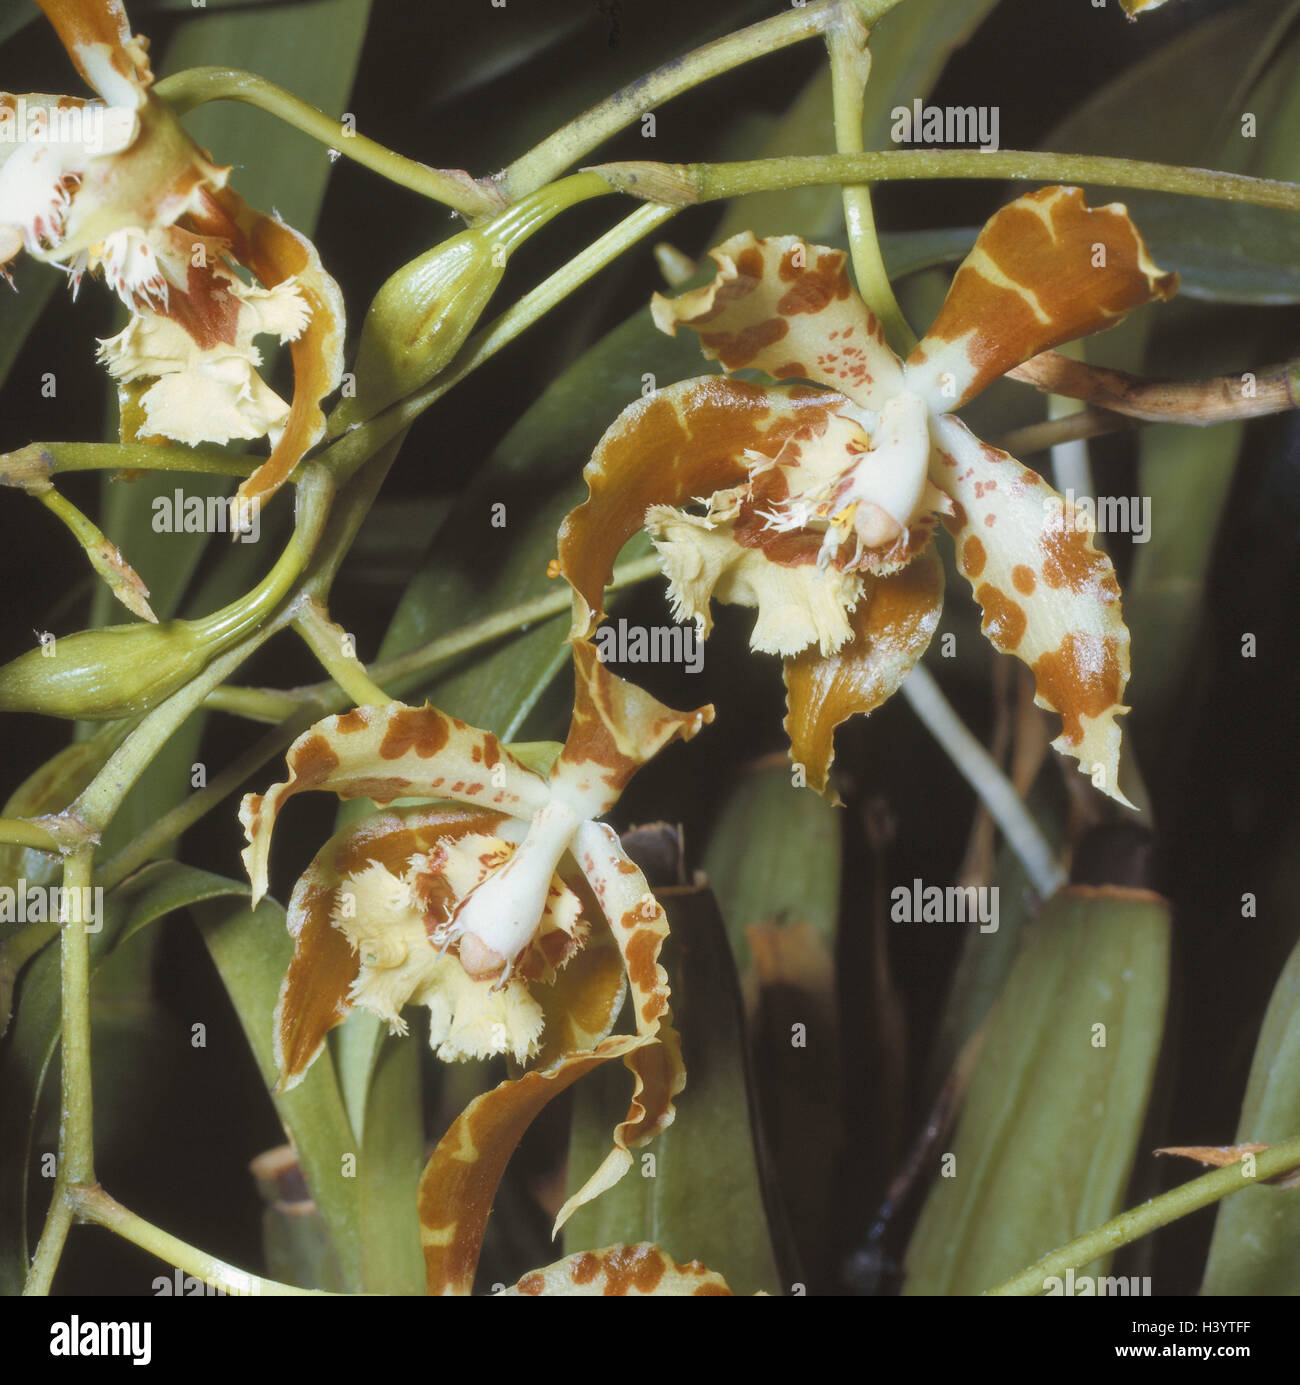 Tiger's orchid, Odontoglossum luteum, blossoms, close up, nature, botany, flora, plants, flowers, orchids, tropical orchids, tropical plants, Orchis, orchis plants, Orchidaceae, tiger's orchid, blossom, Rossioglossum grandee, orchid blossoms, Ticino, Verz Stock Photo